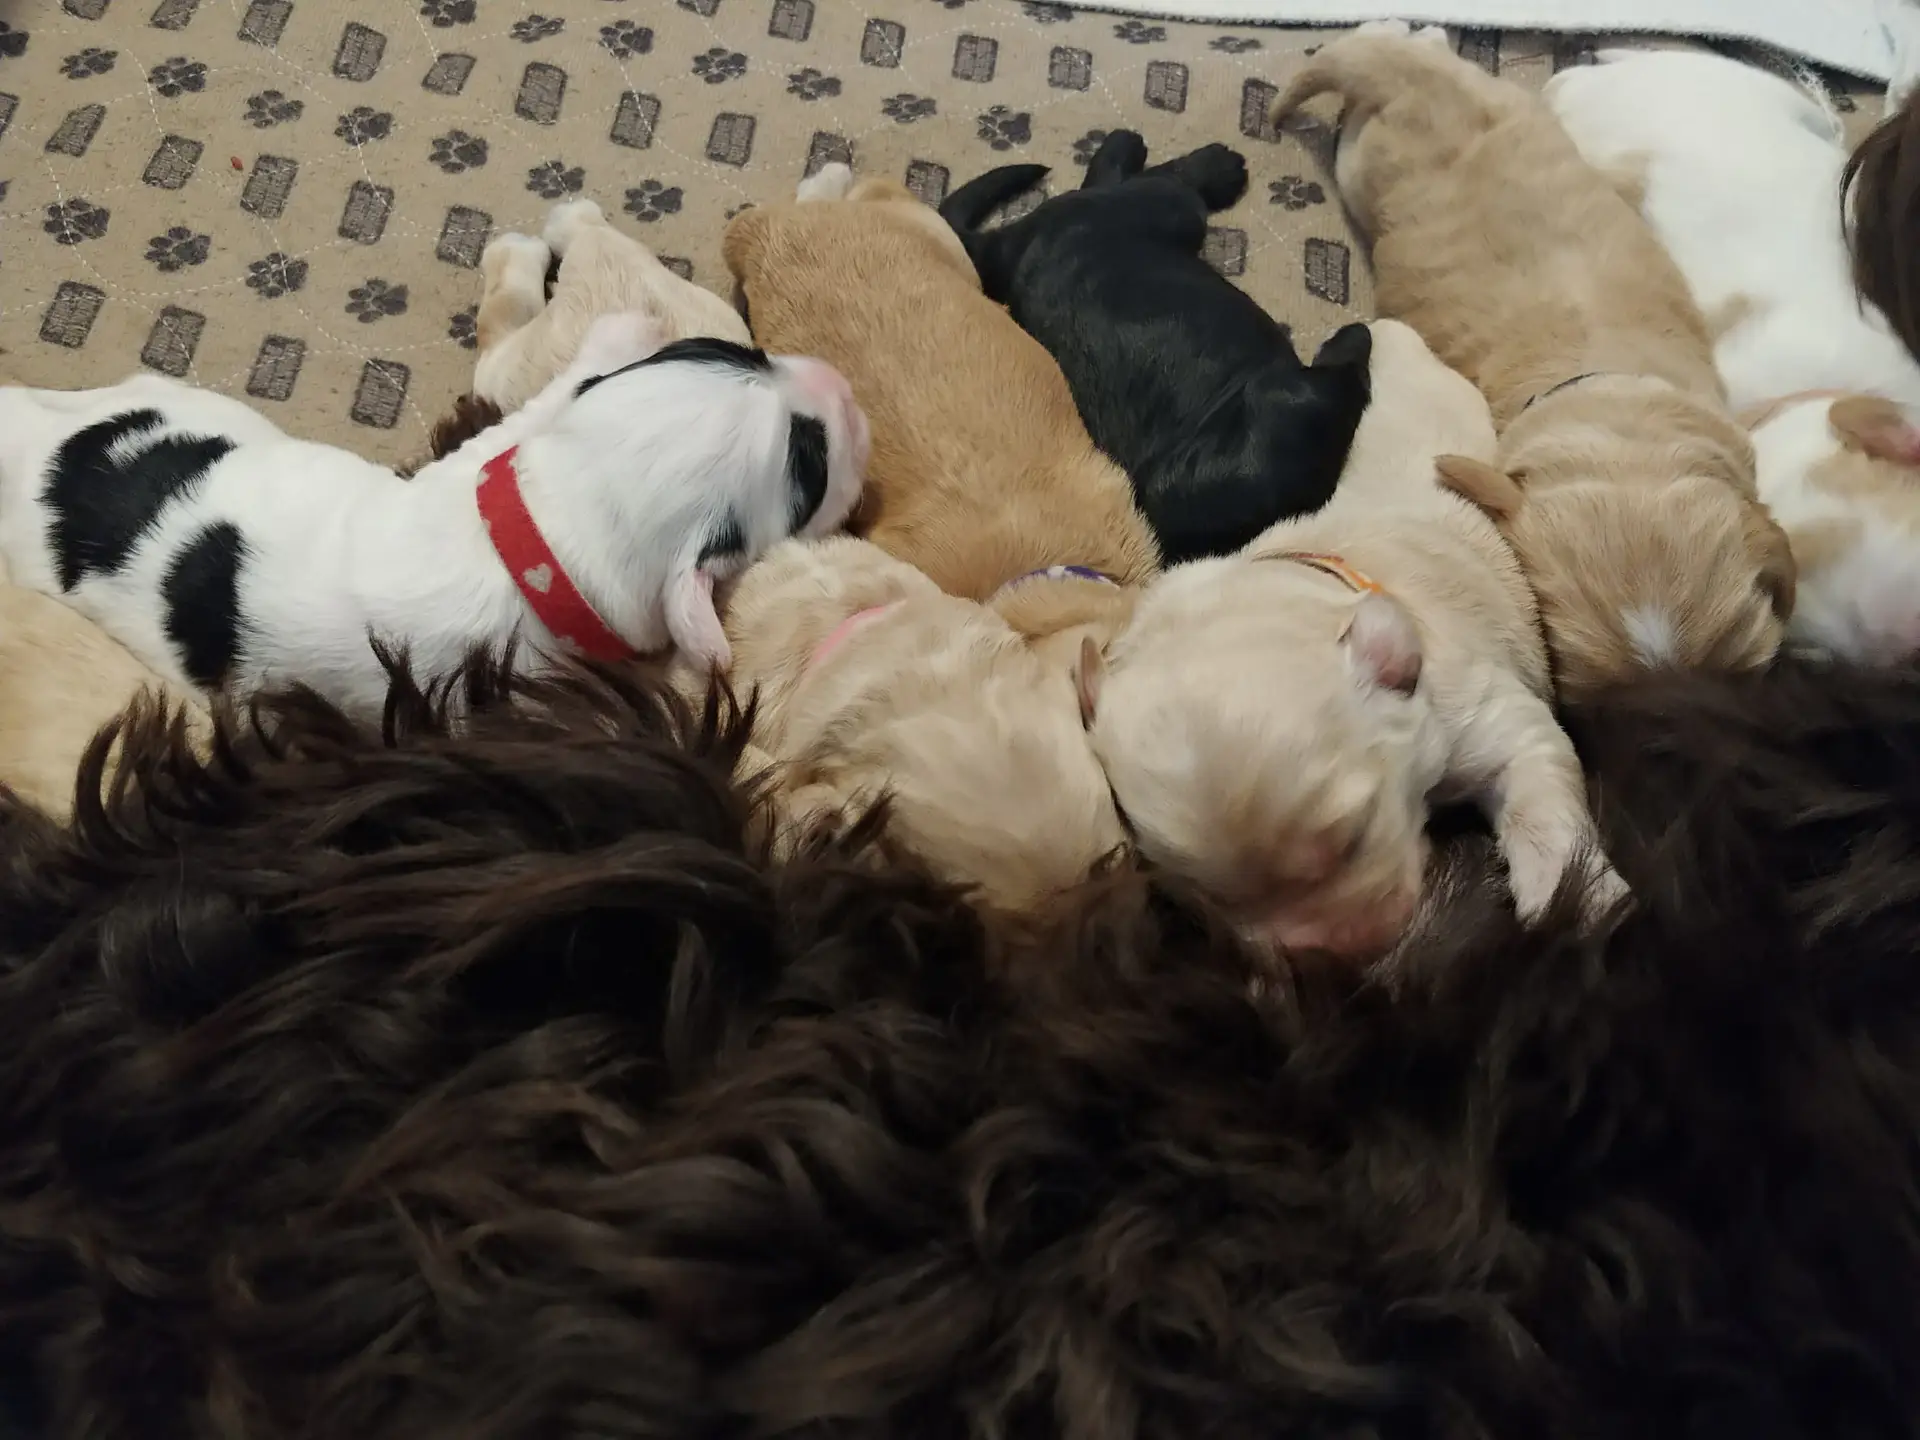 10 labradoodle puppies feeding at mom, picture taken from behind mom pointed towards puppies